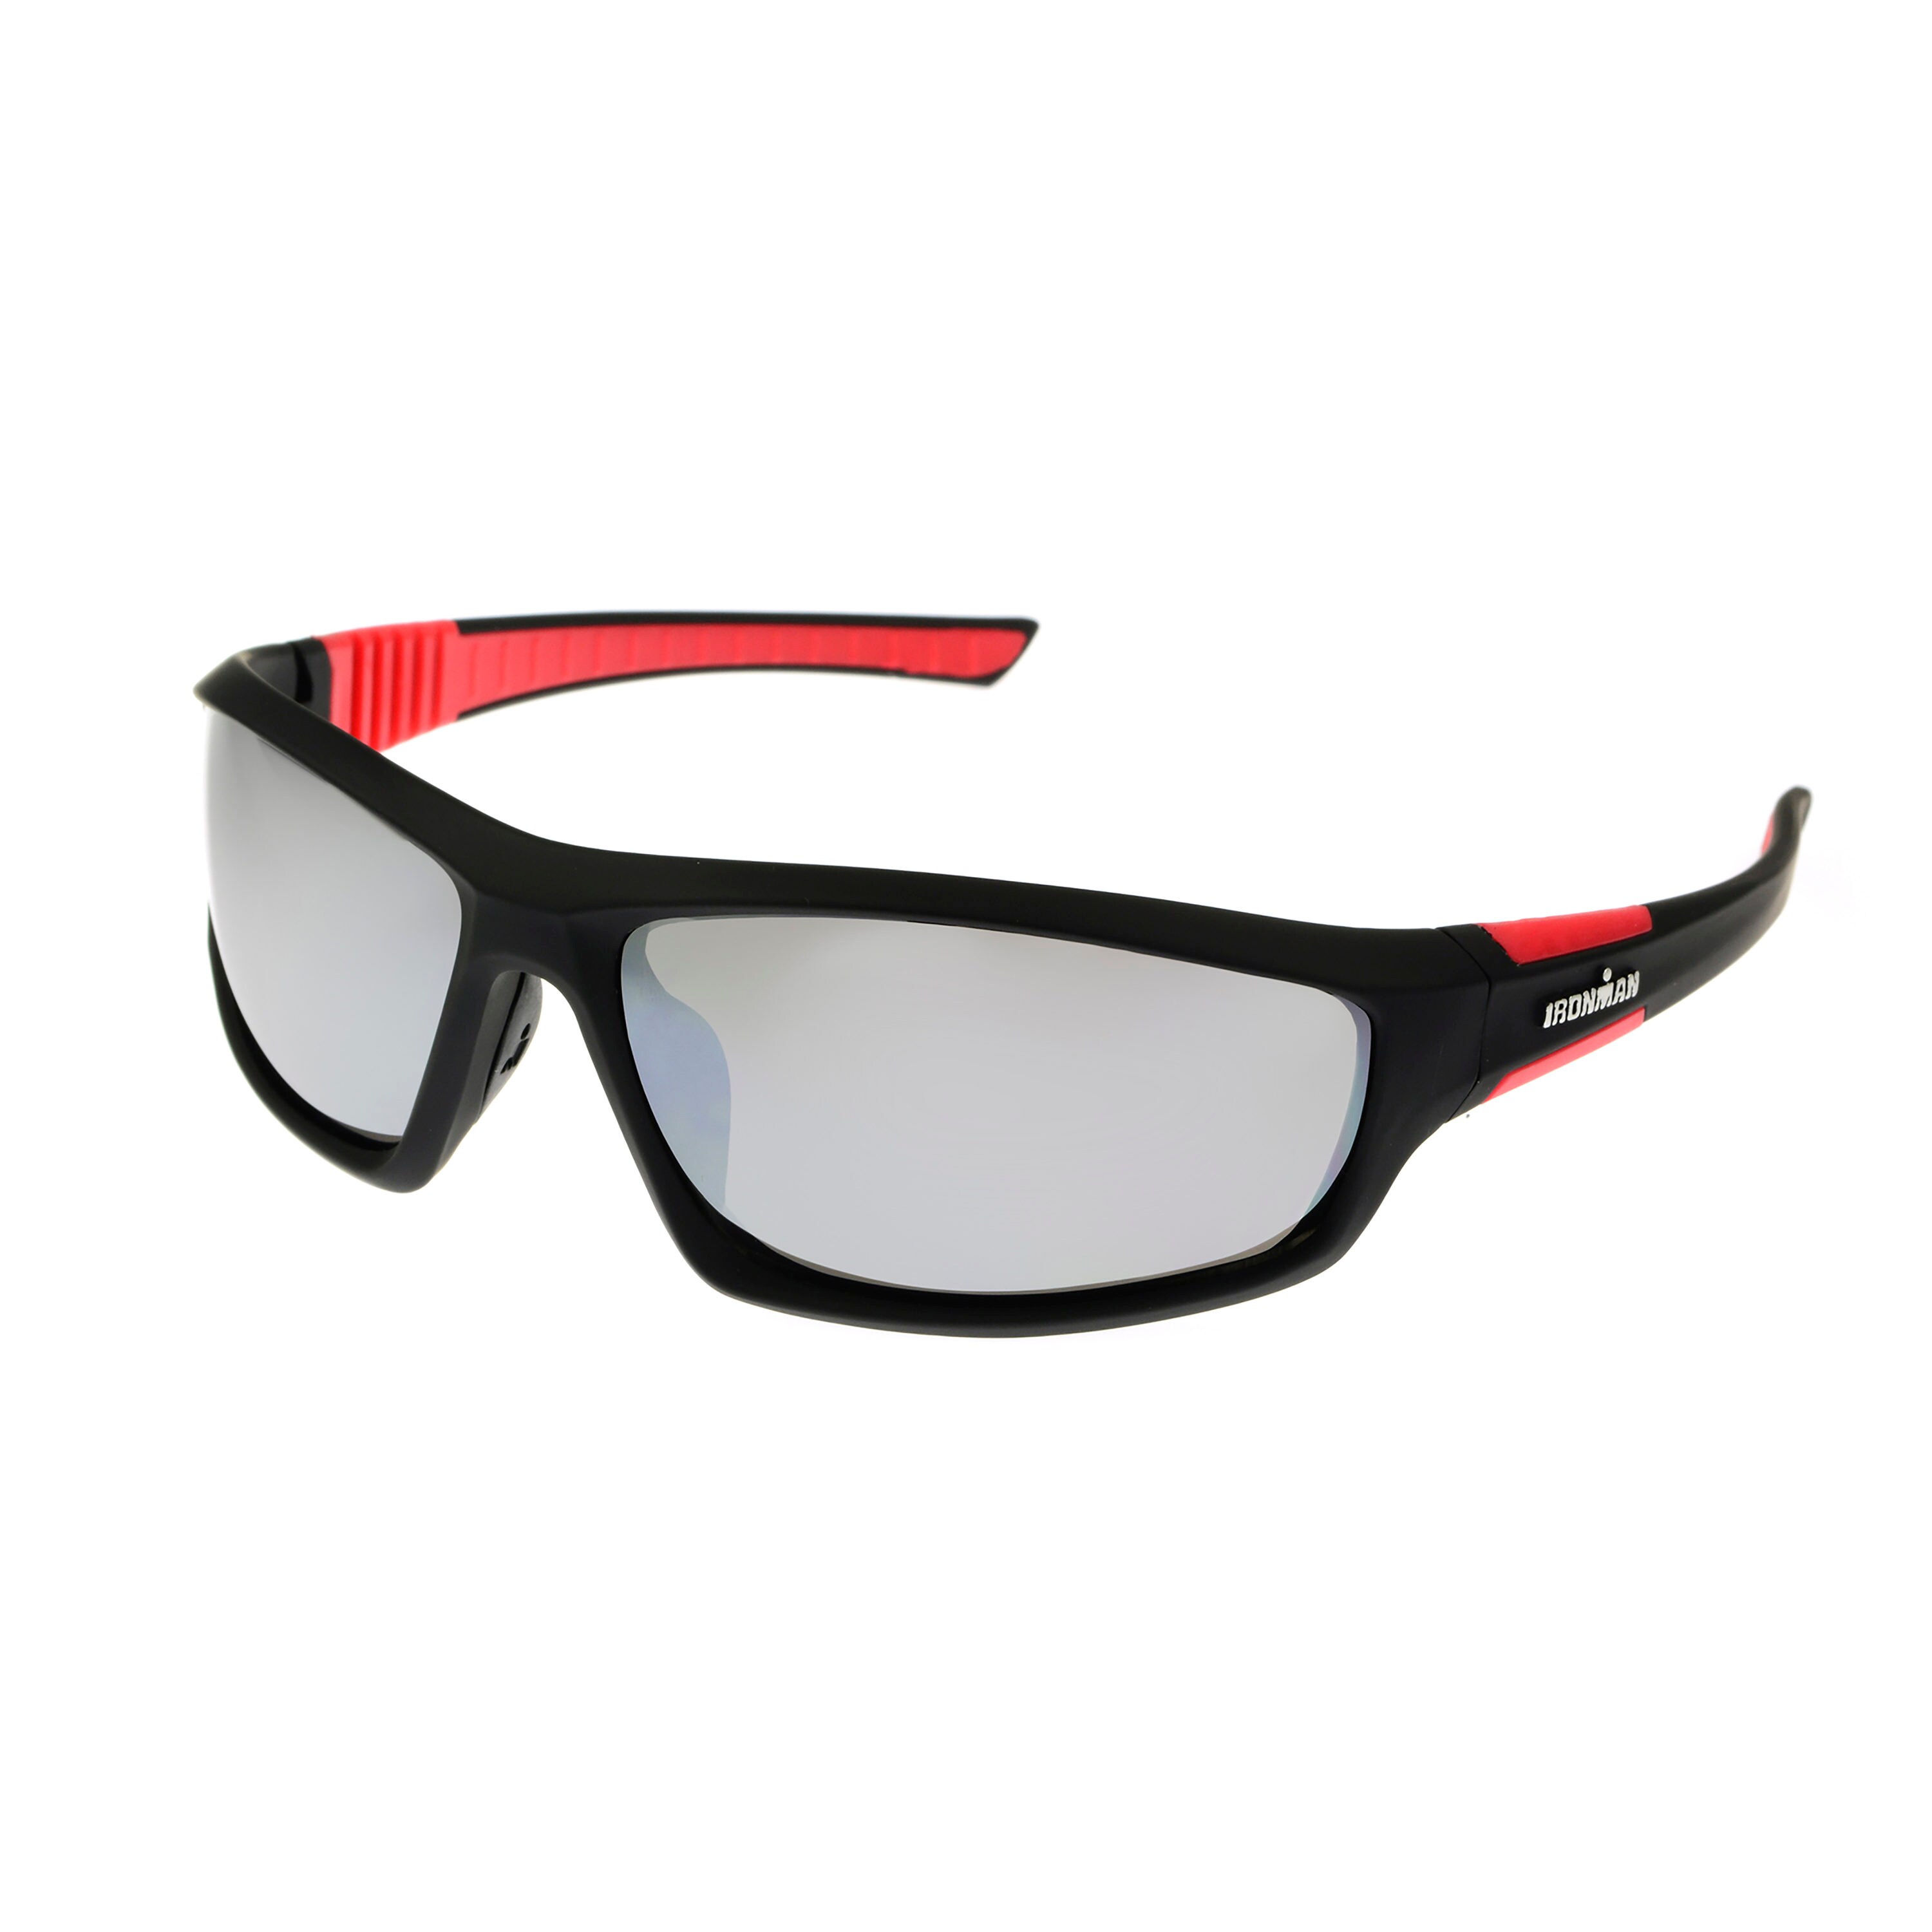 Foster Grant Ironman Sunglasses IF 1802 Red mirror 